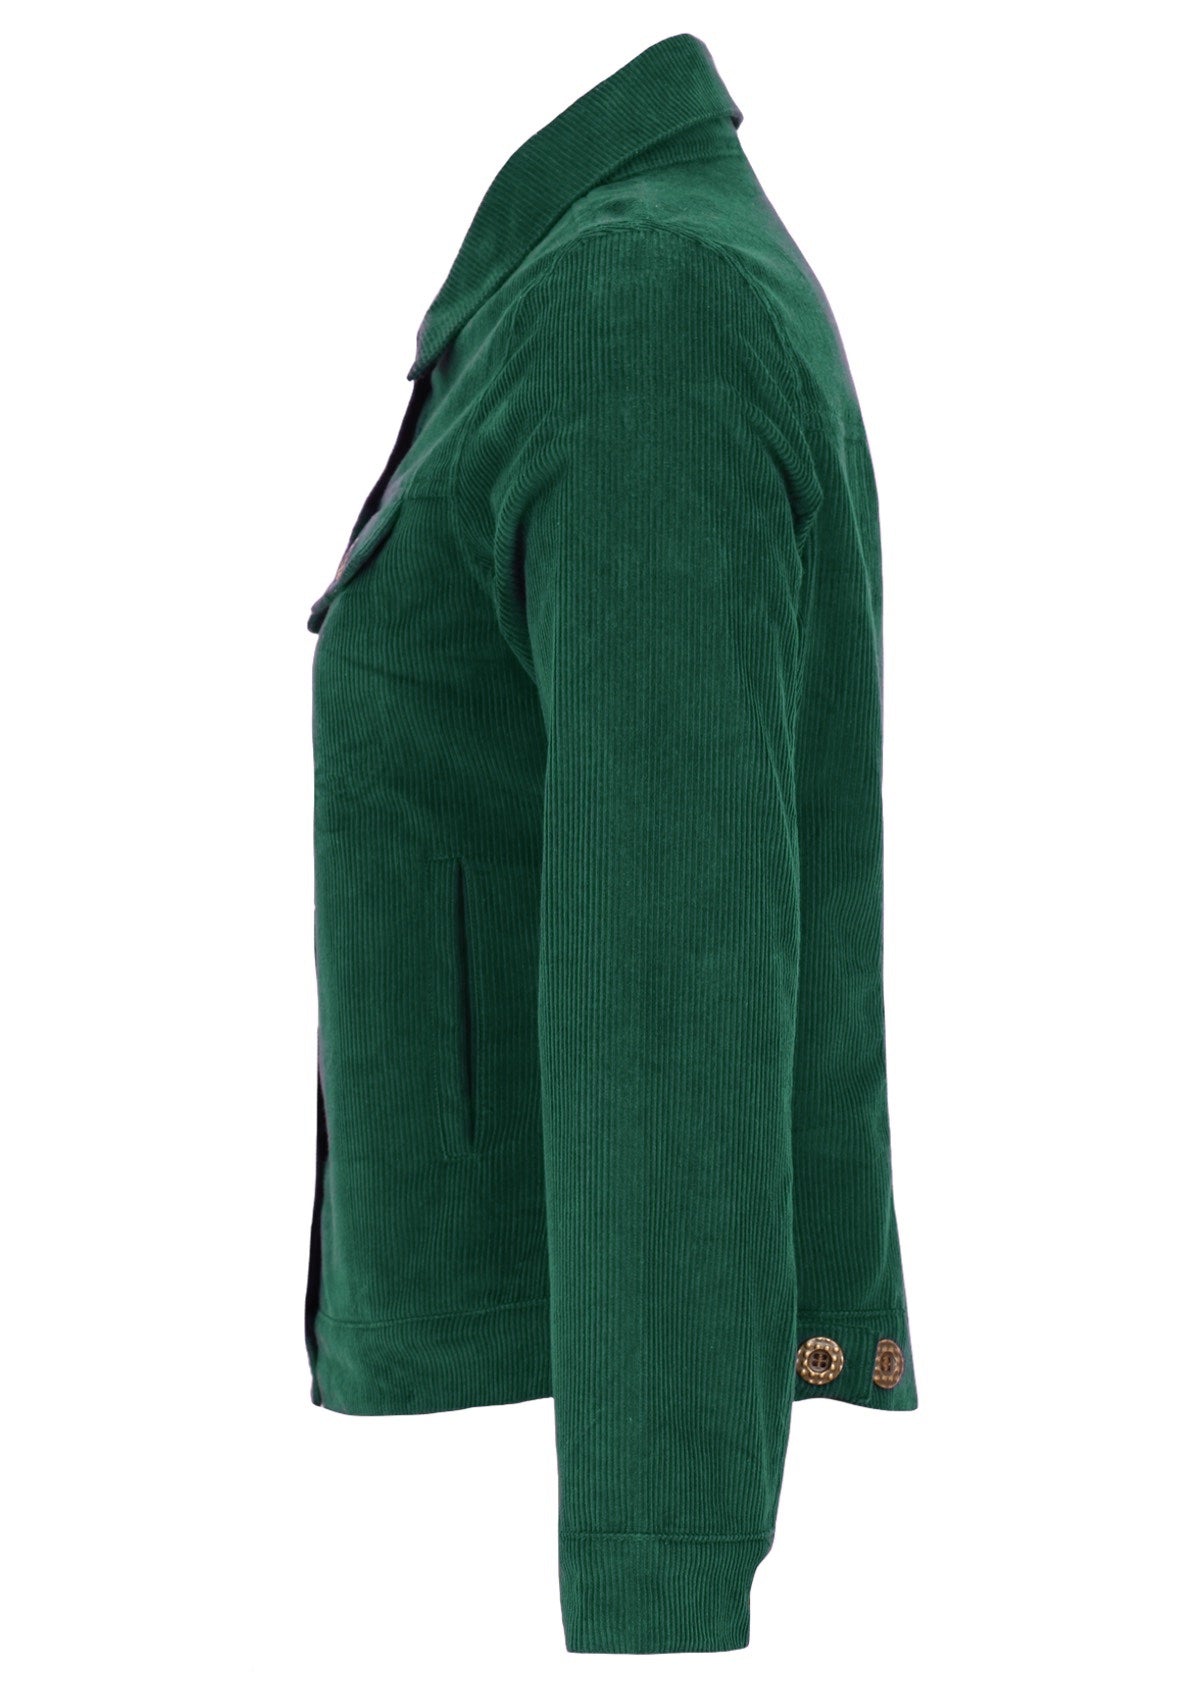 Green cotton corduroy jacket can be work open or closed with brass buttons. 